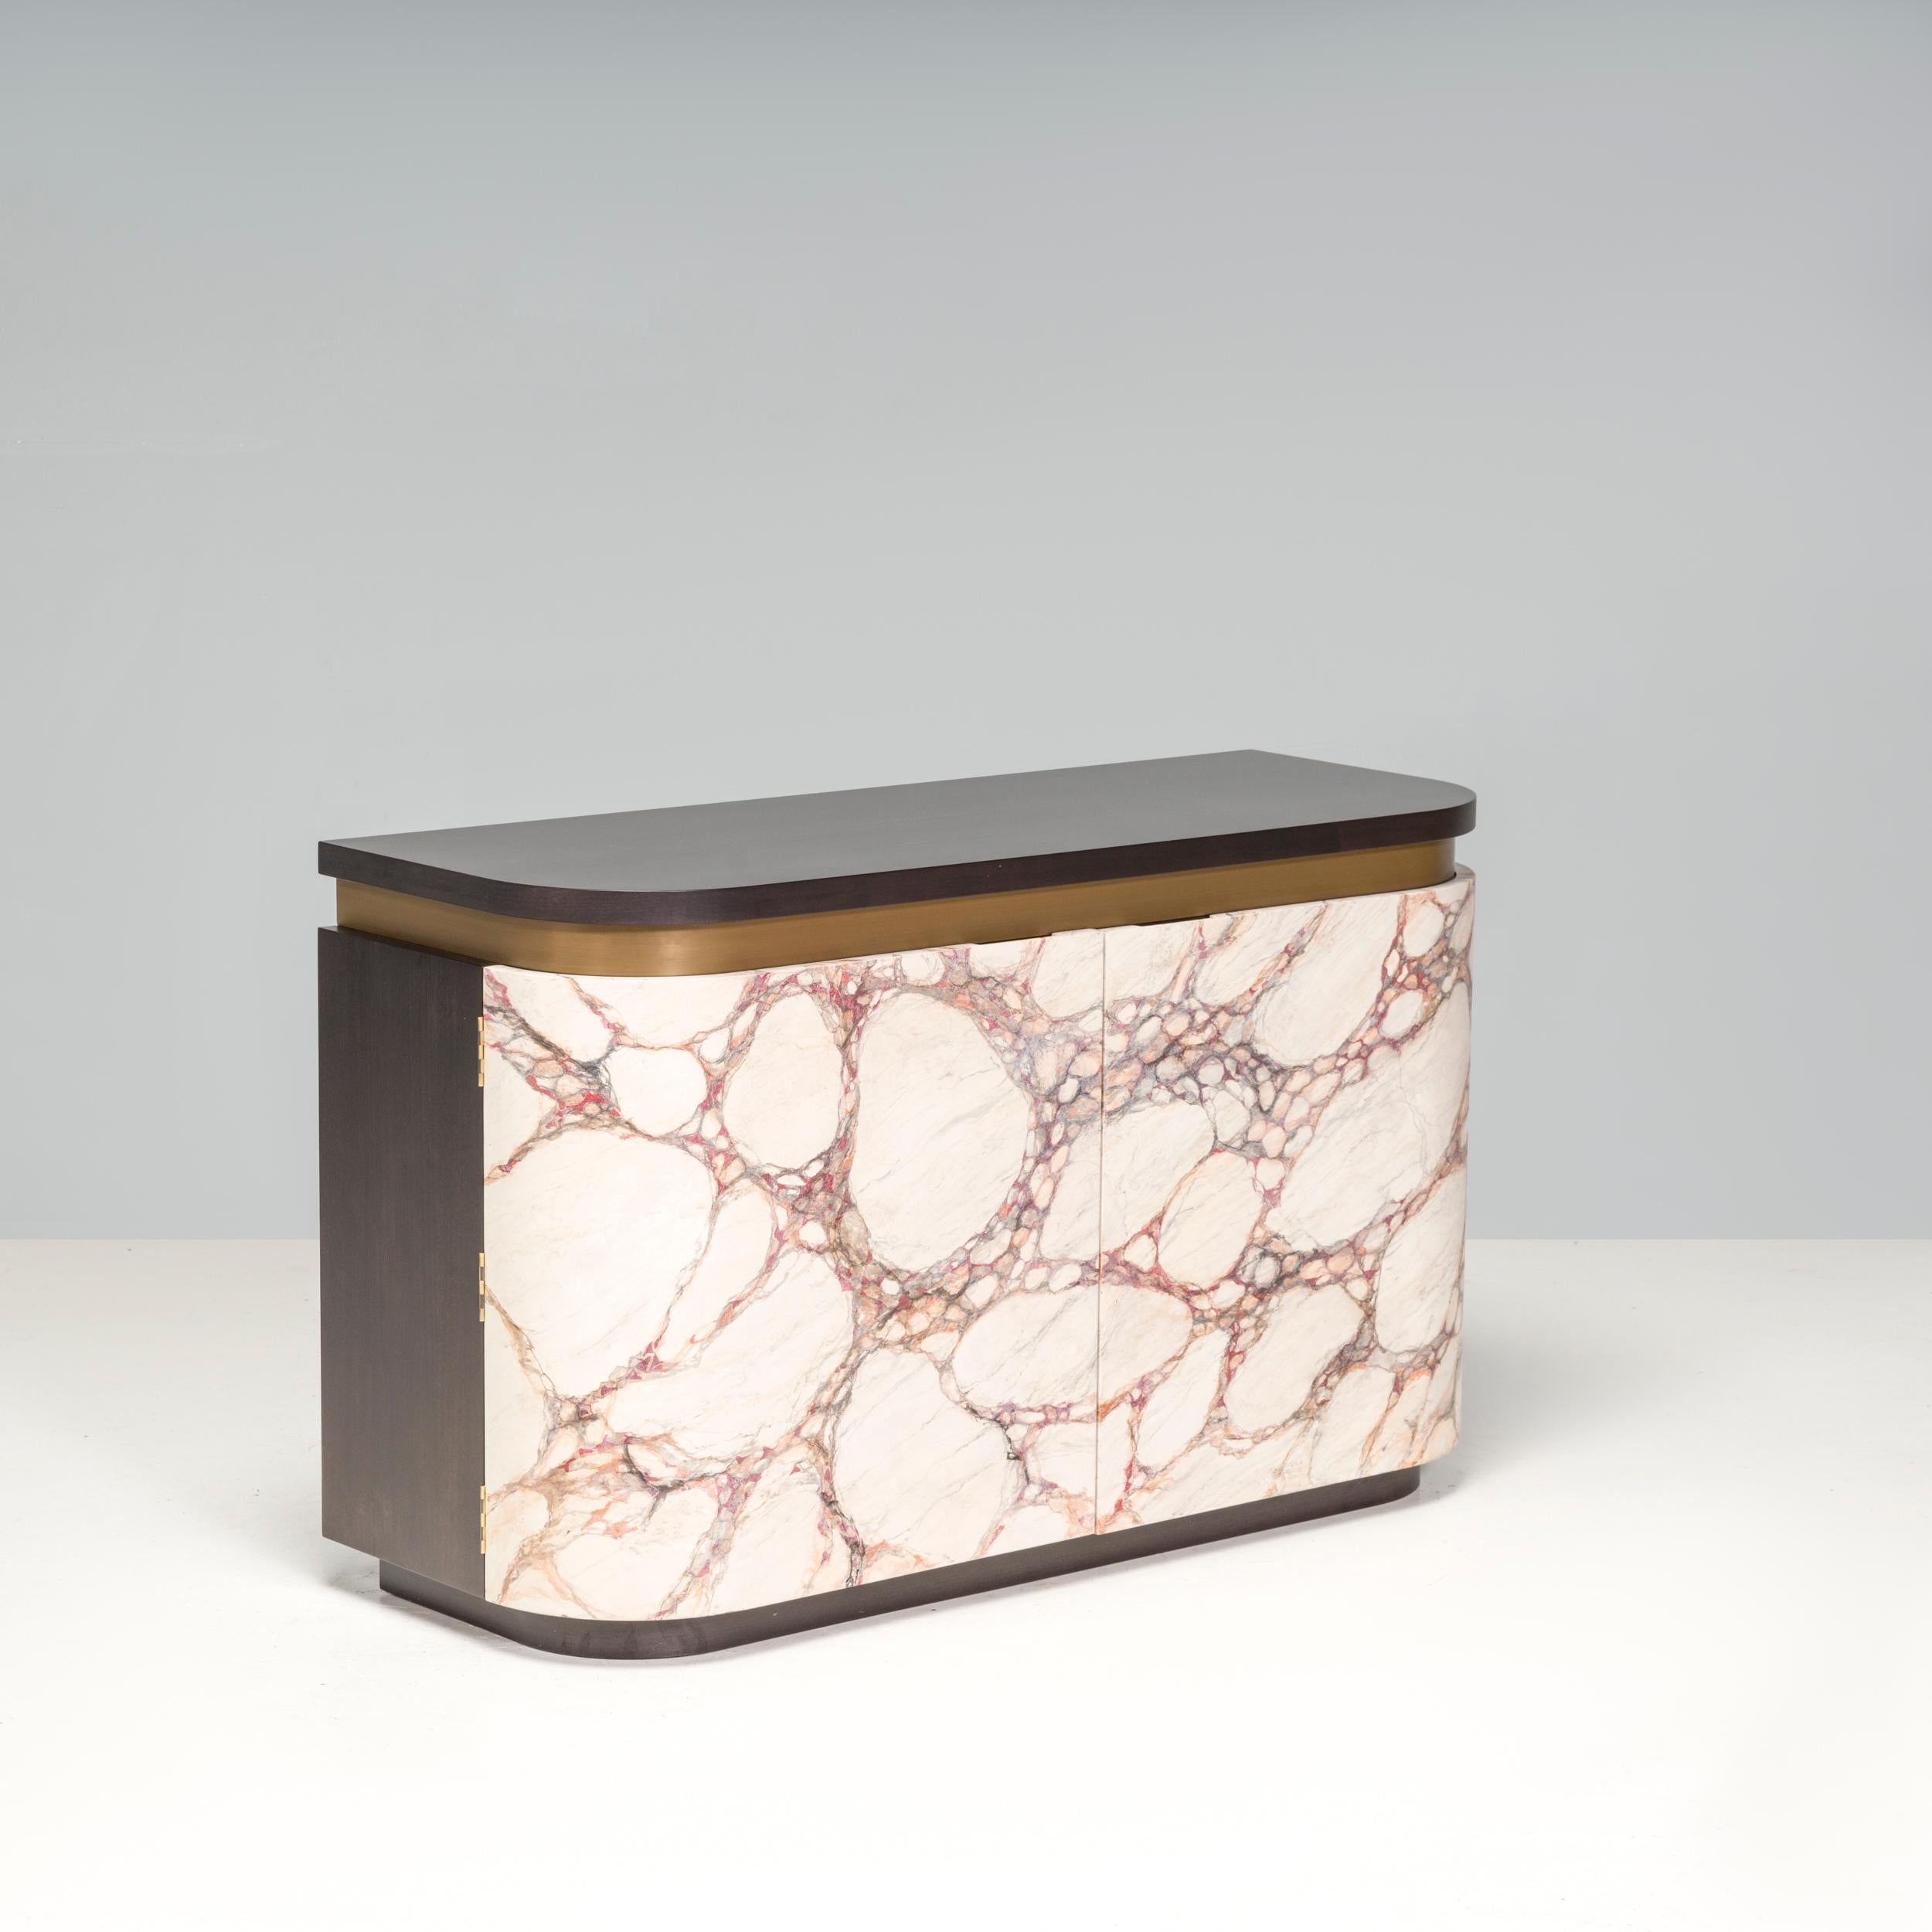 The Bespoke Marble Effect Side Board is a sleek, modern design with a mix of materials. The dark wooden panelling contrasts beautifully with the lighter and brighter colours of the marbling. When opened, the doors reveal spacious shelves also backed